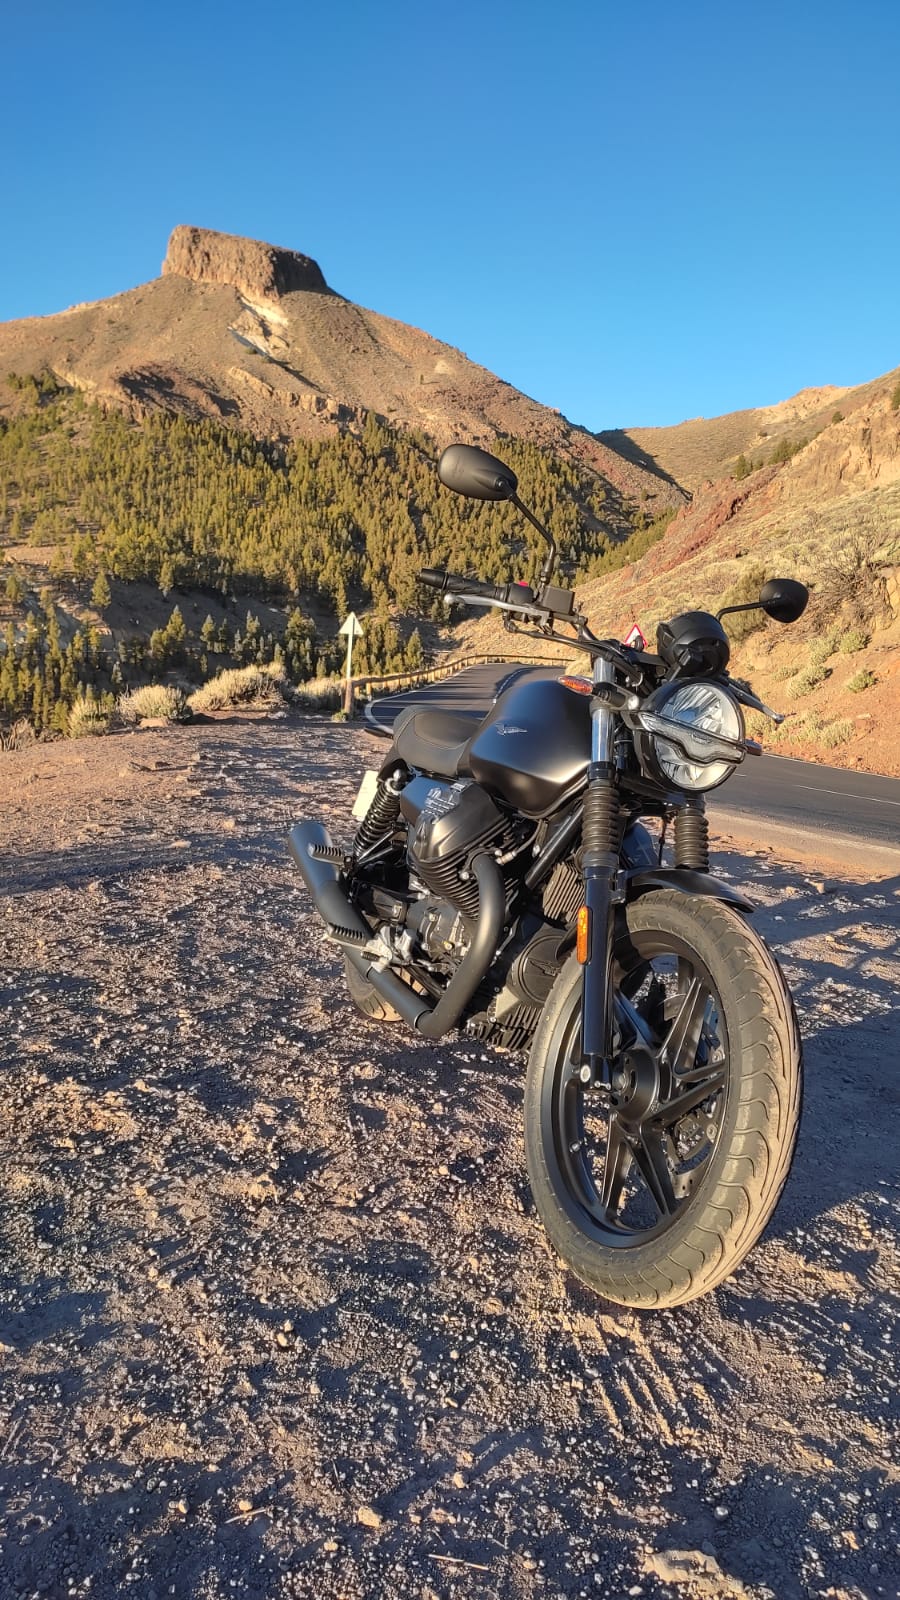 A motorcycle is parked on the side of a dirt road in front of a mountain.